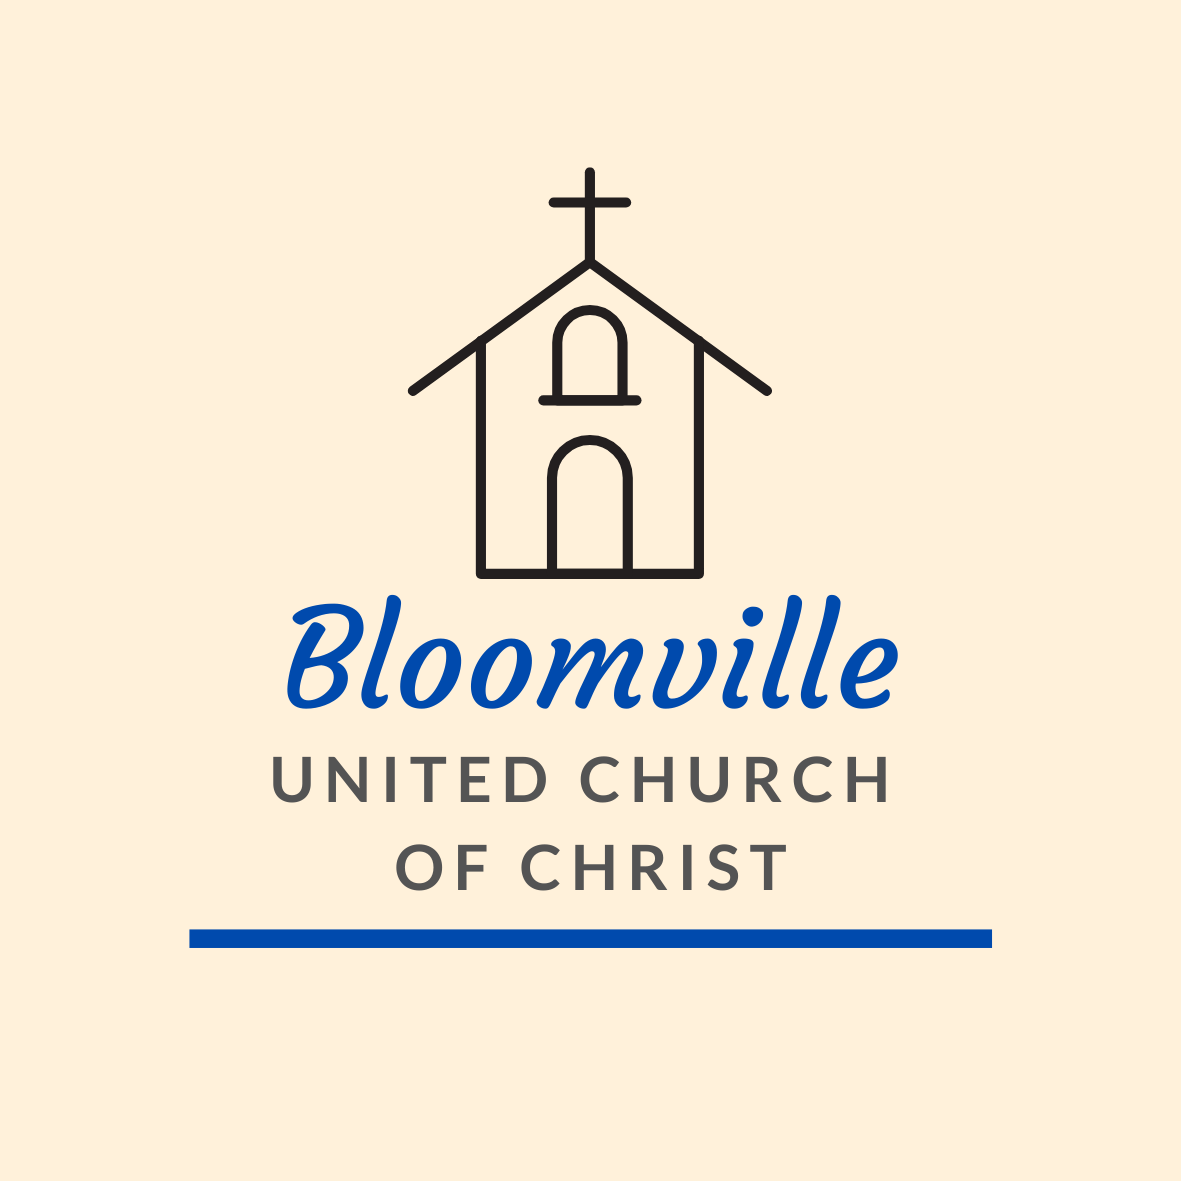 Bloomville United Church of Christ